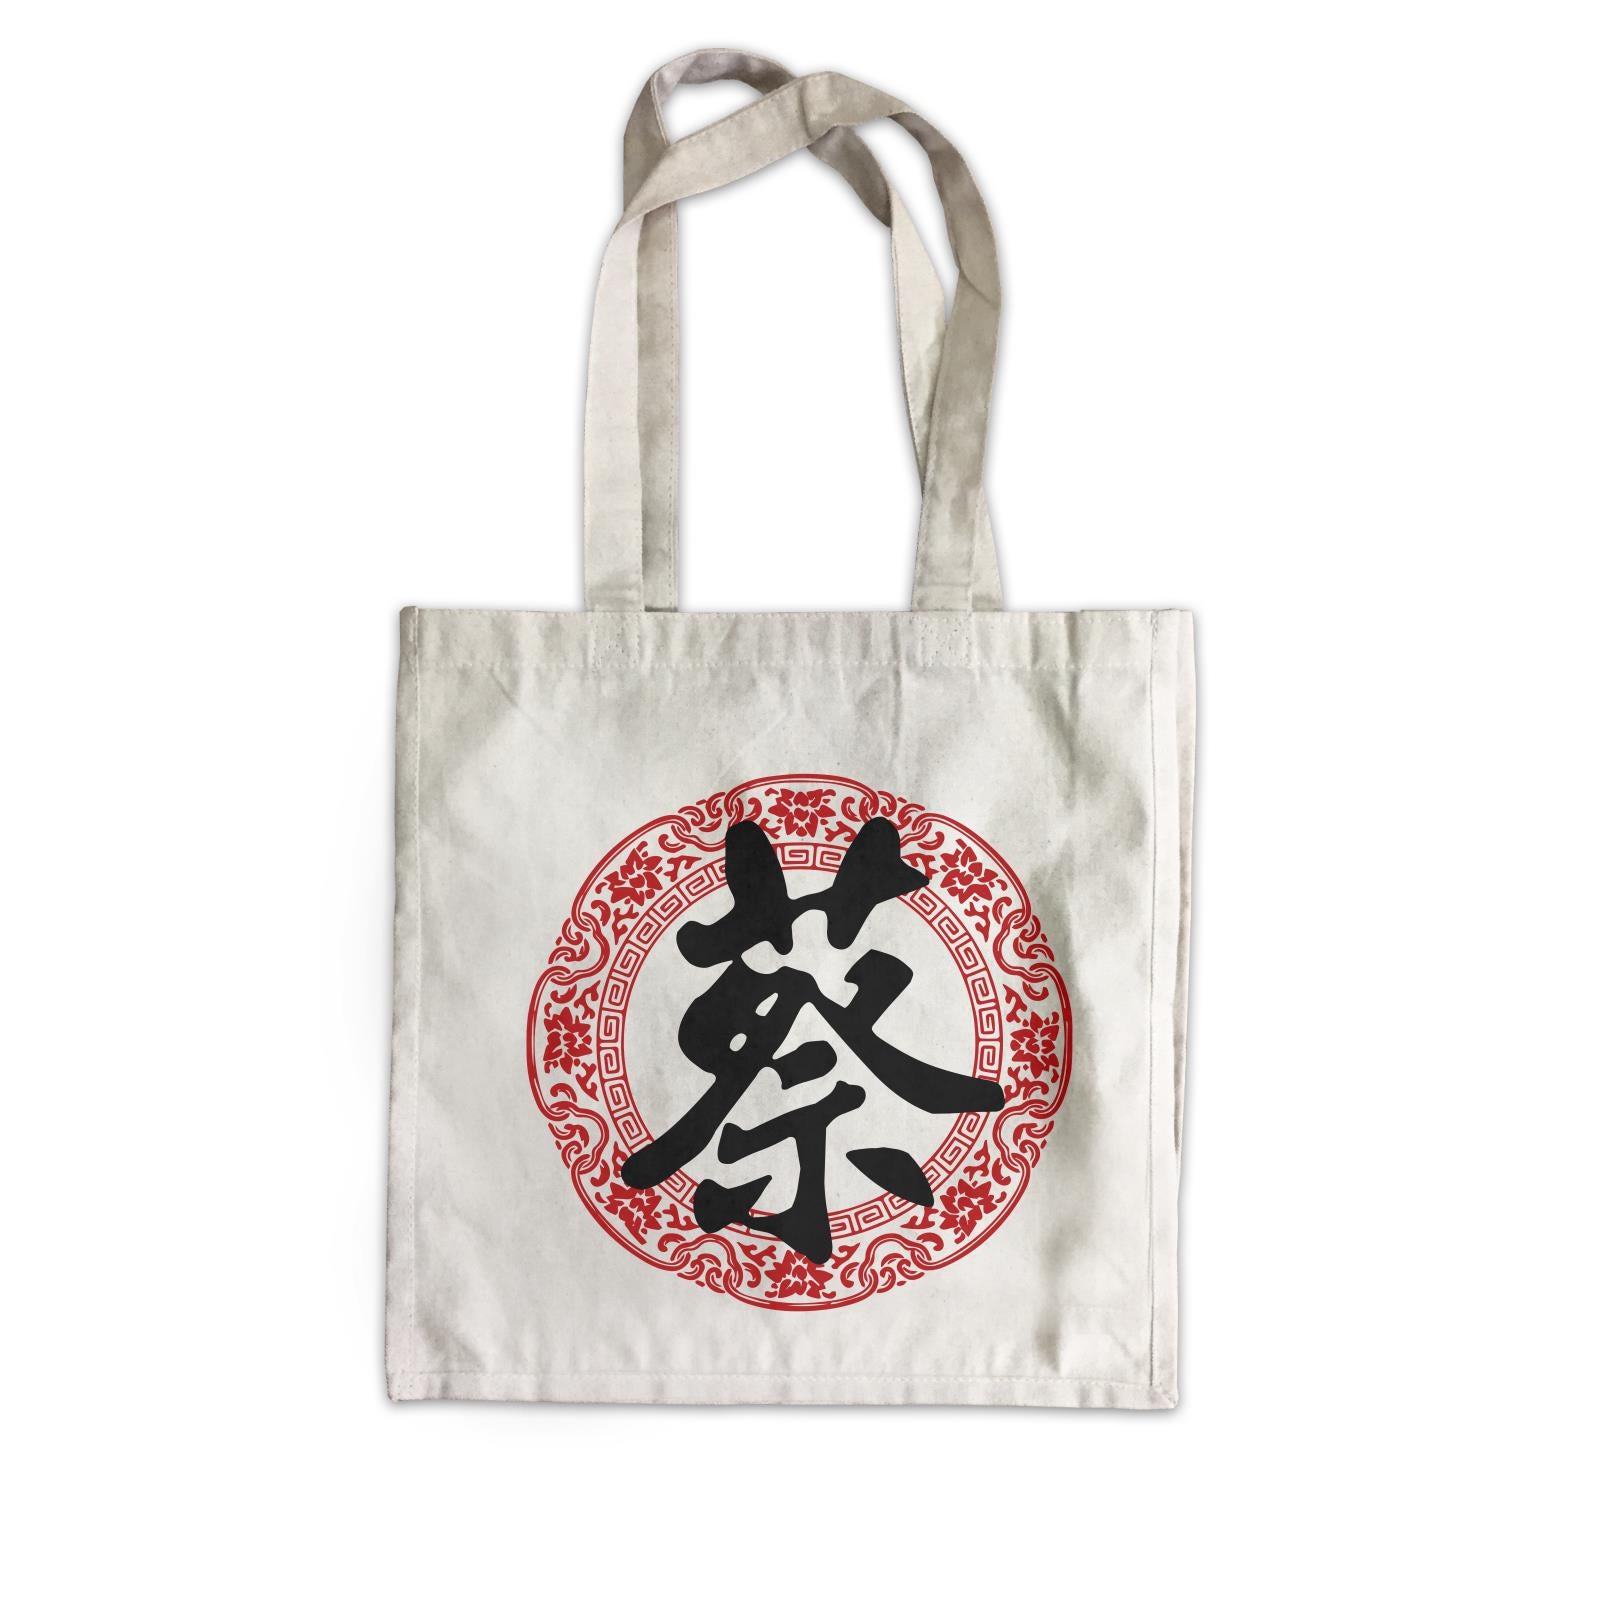 Chinese New Year Surname with Floral Emblem Ang Pao Bag Canvas Bag  Personalizable Designs